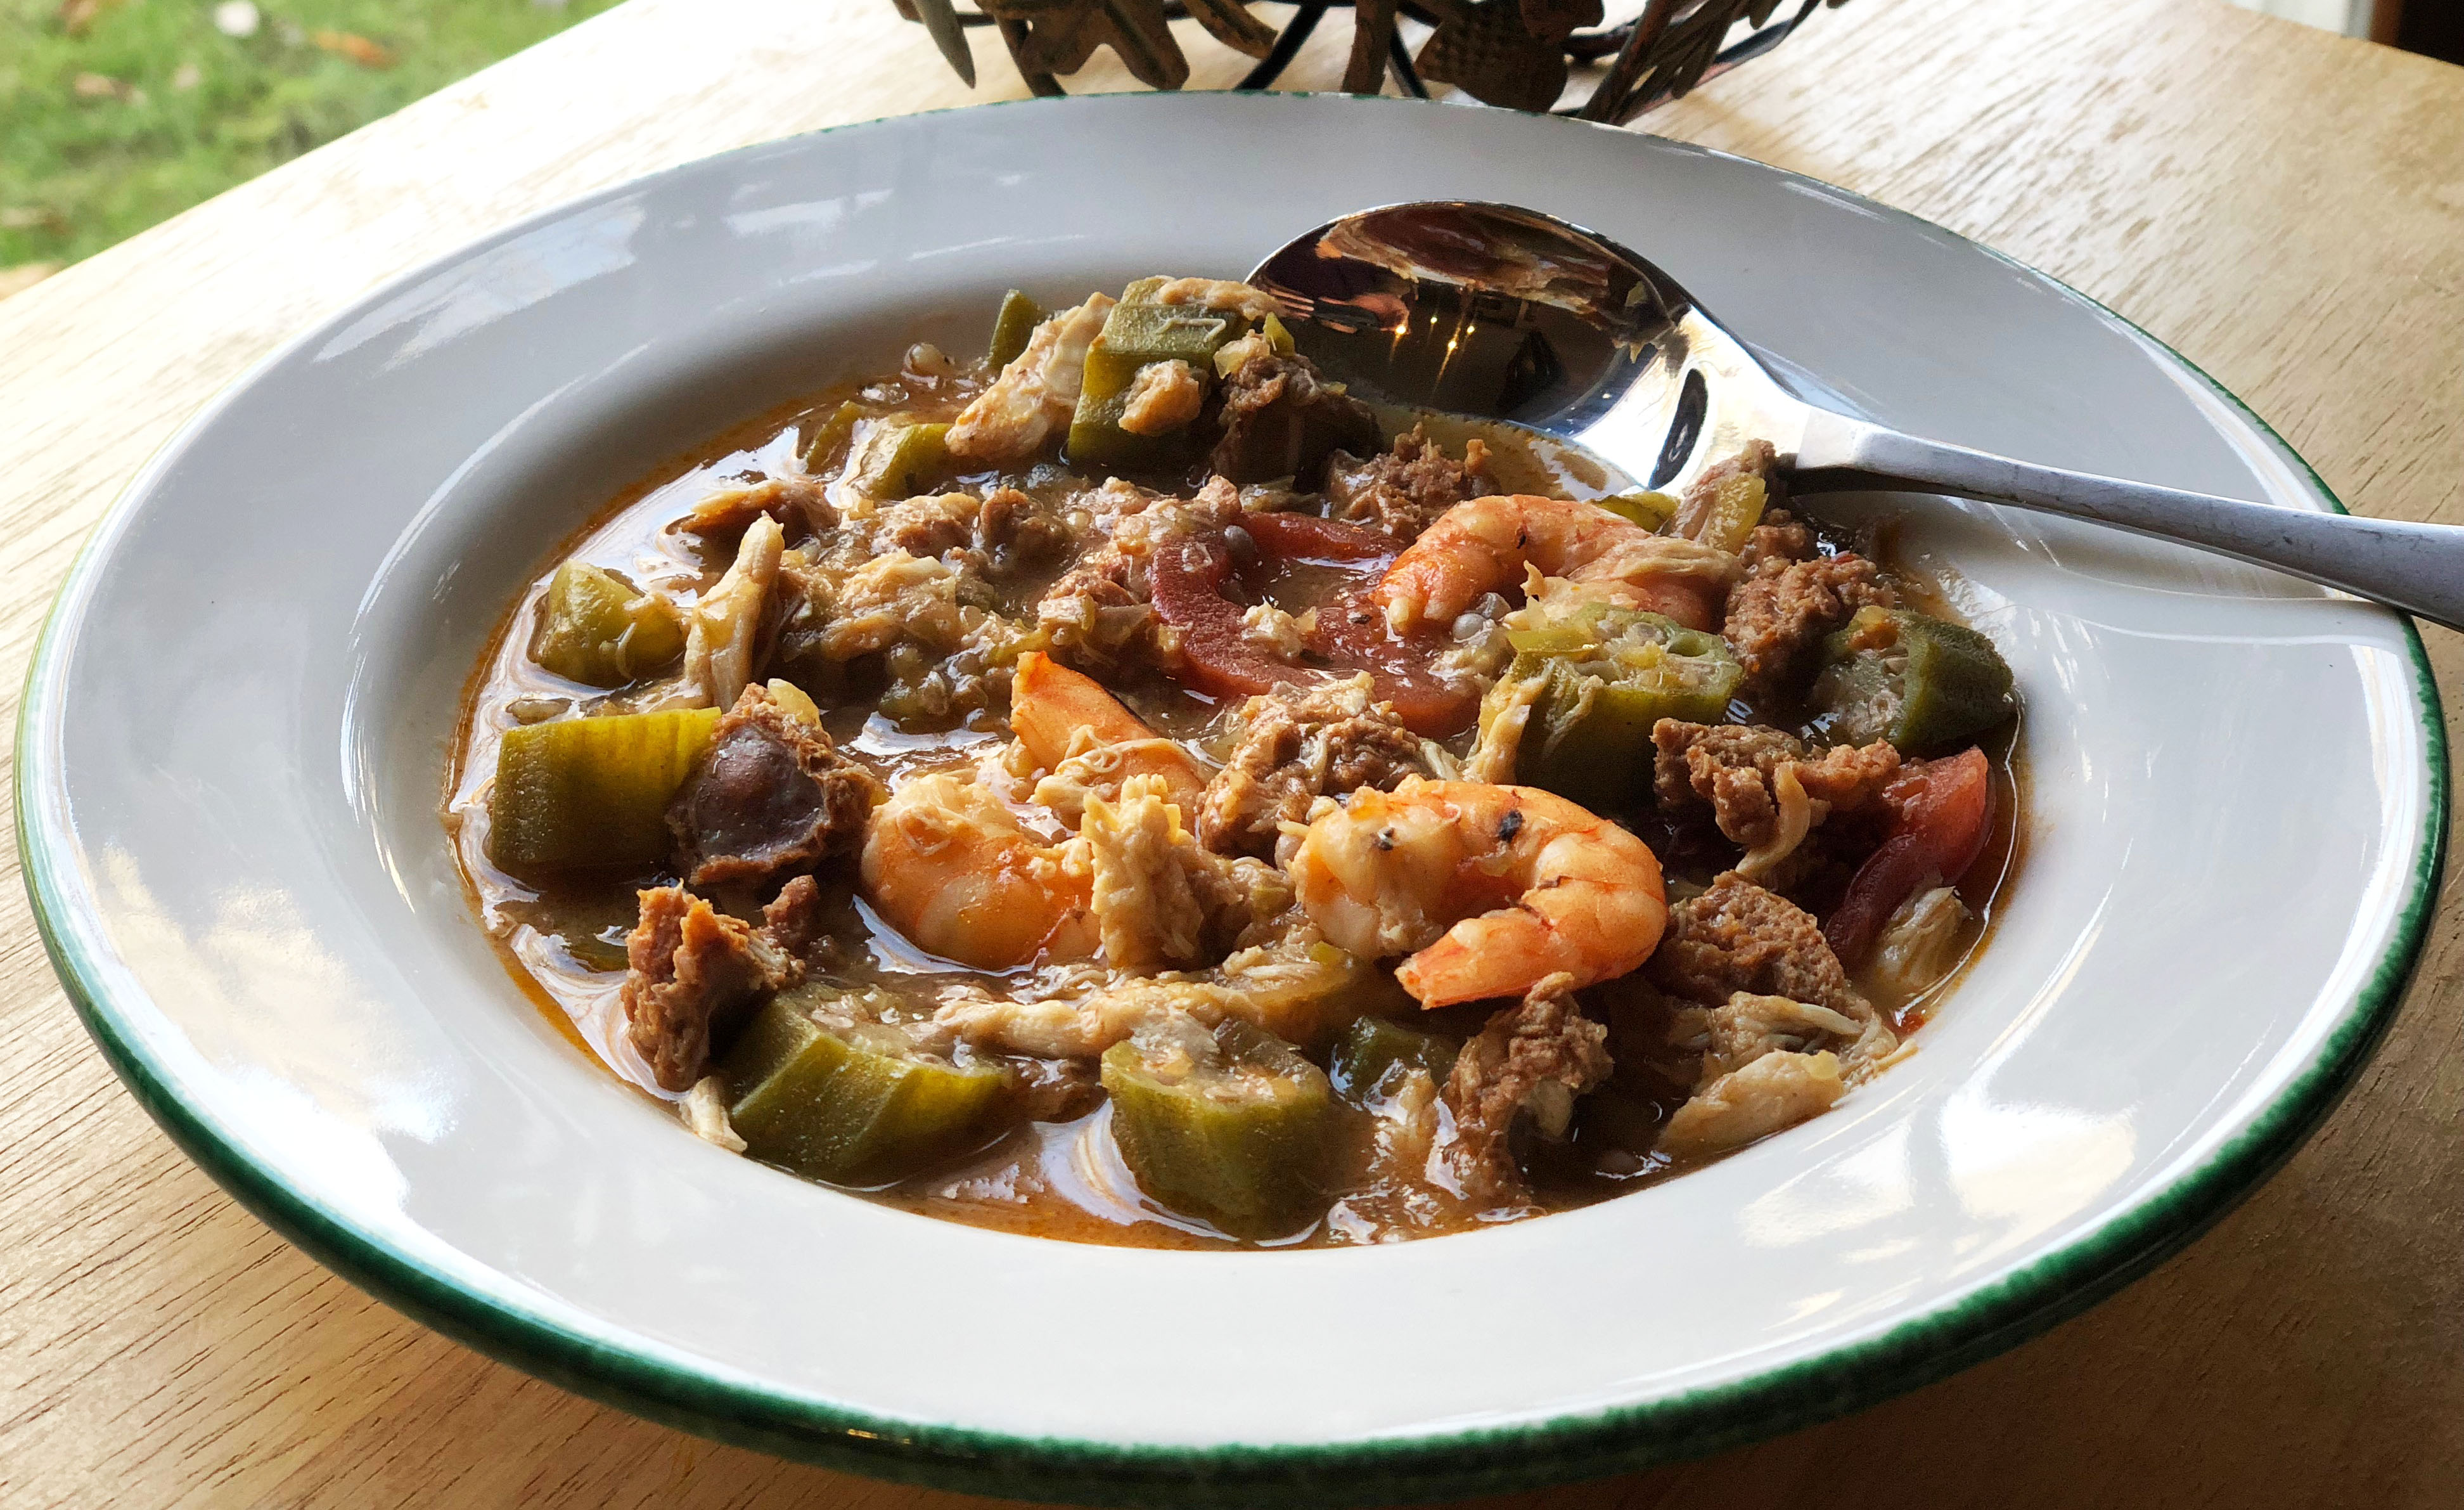 New Orleans Creole Gumbo